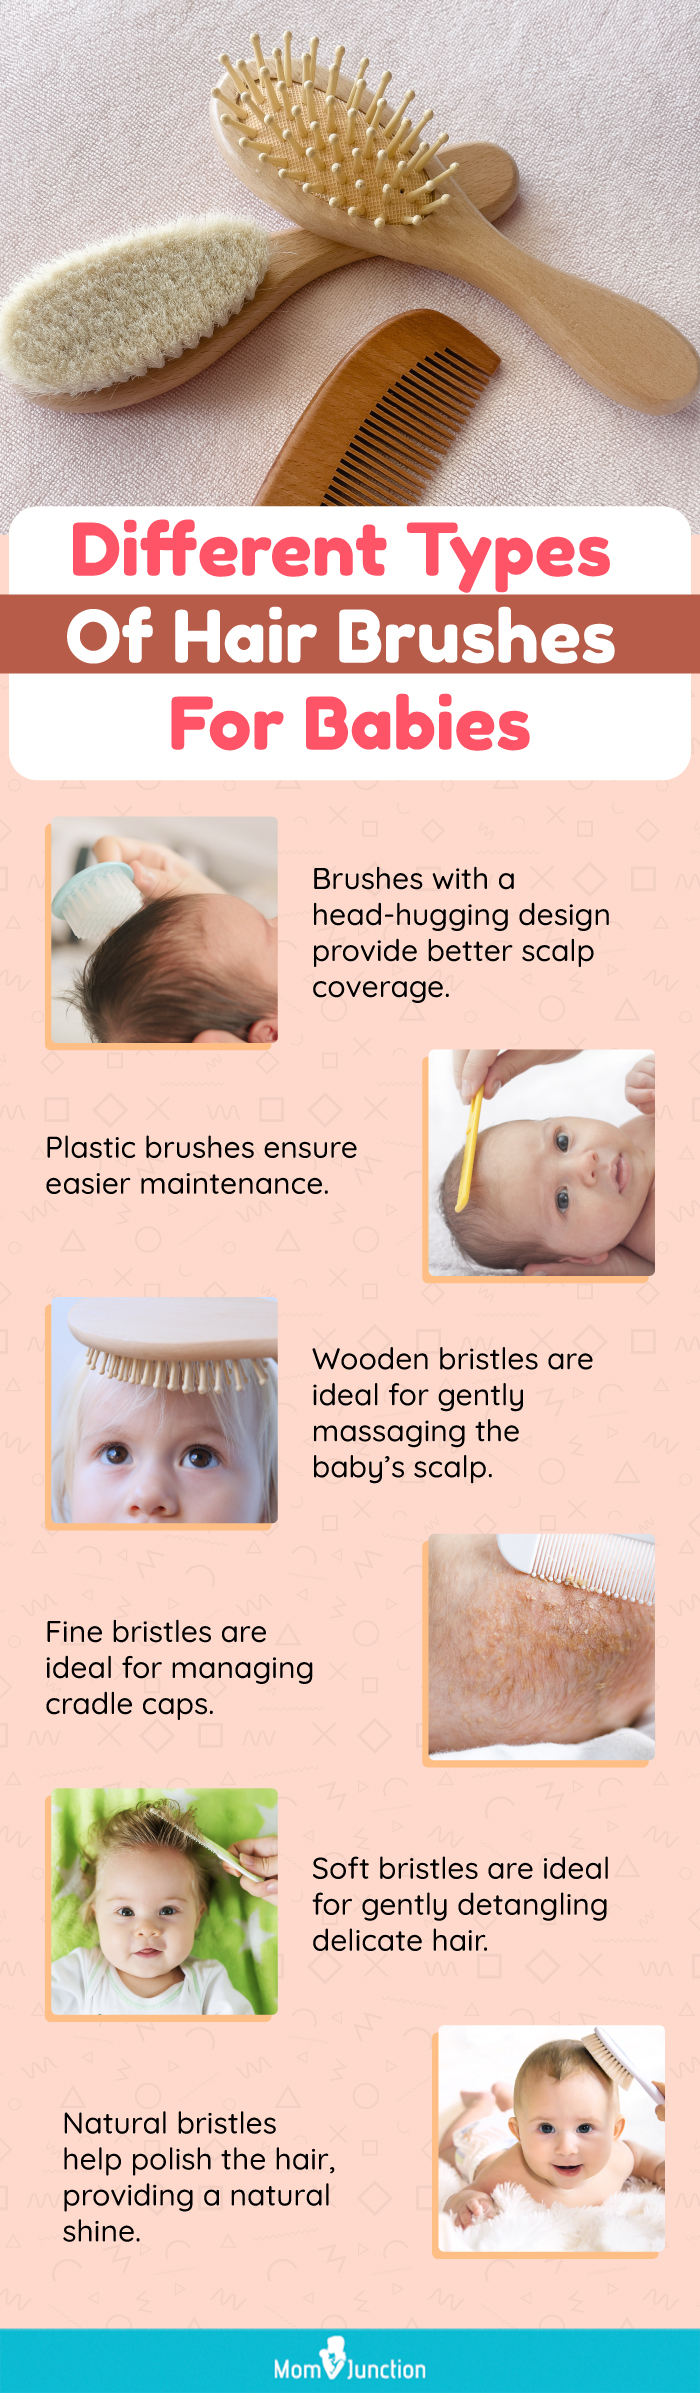 How to clean a baby hair brush?